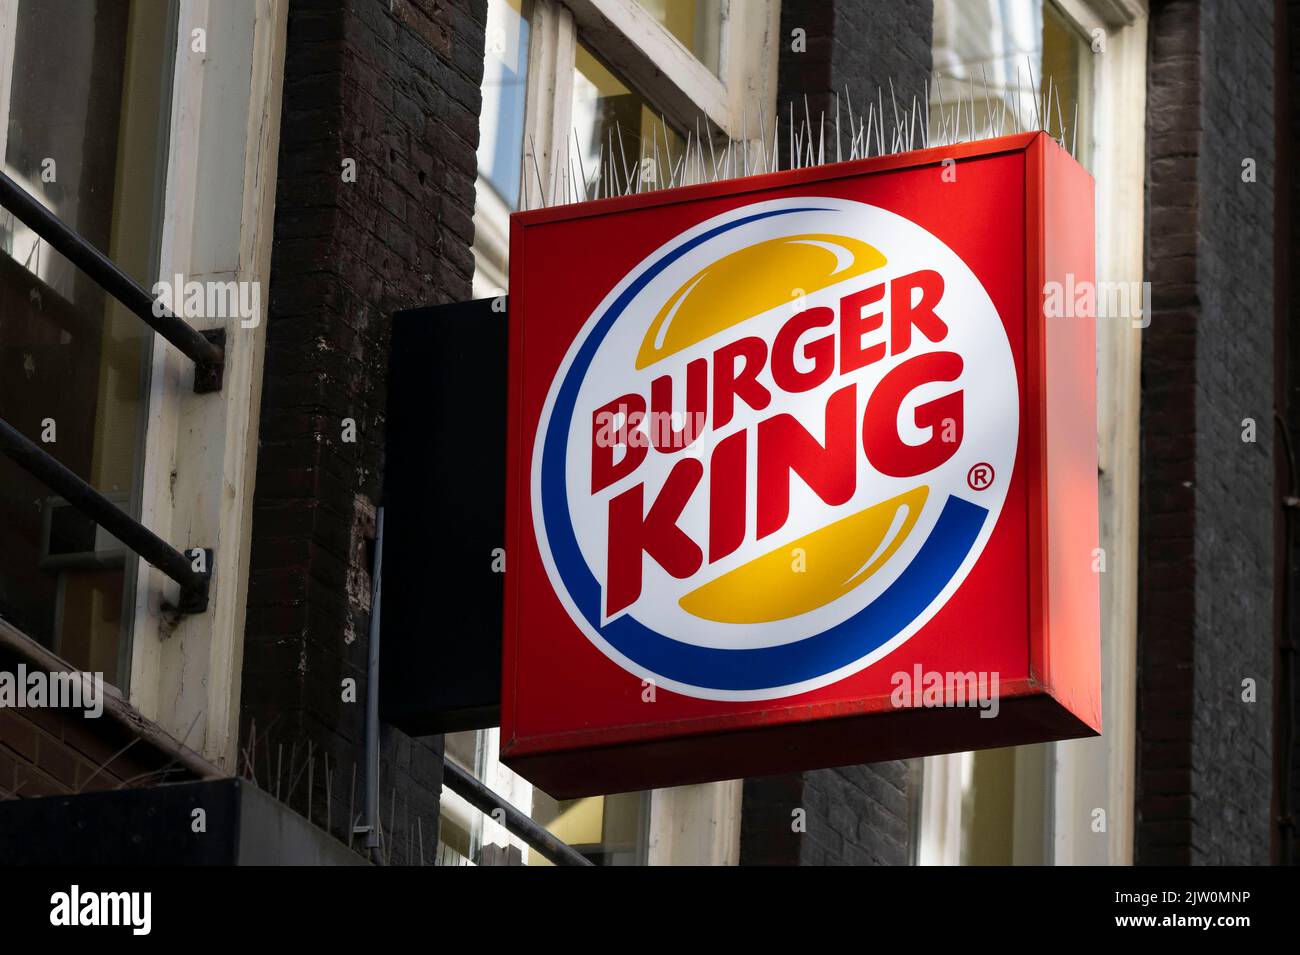 A Burger King restaurant sign in Amsterdam, Holland. Stock Photo